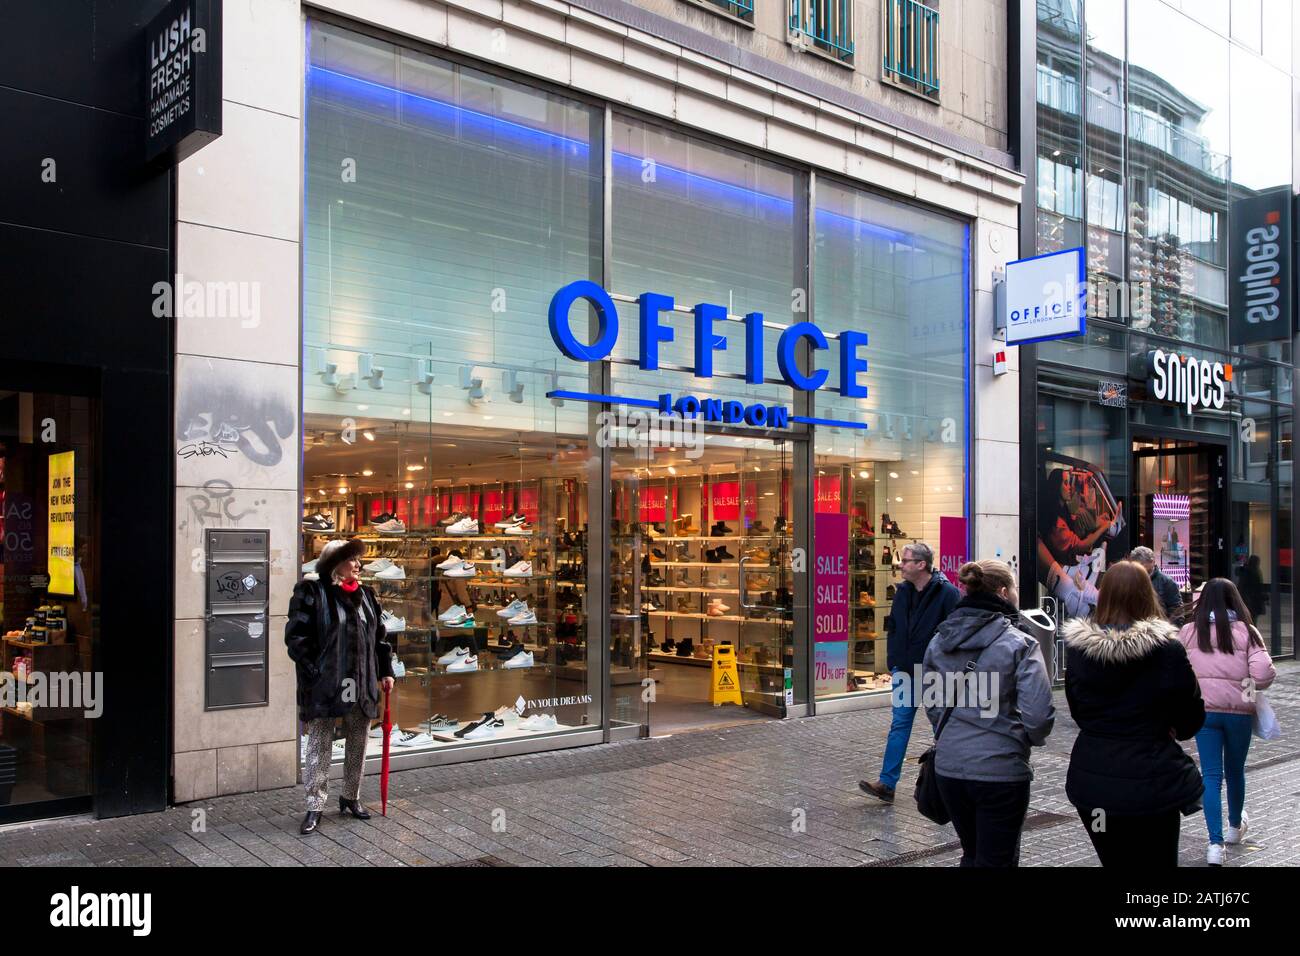 Europe, Germany, Cologne, Office London shoe store on the shopping street Hohe  Strasse. Europa, Deutschland, Koeln, Office London Schuhgeschaeft in d  Stock Photo - Alamy